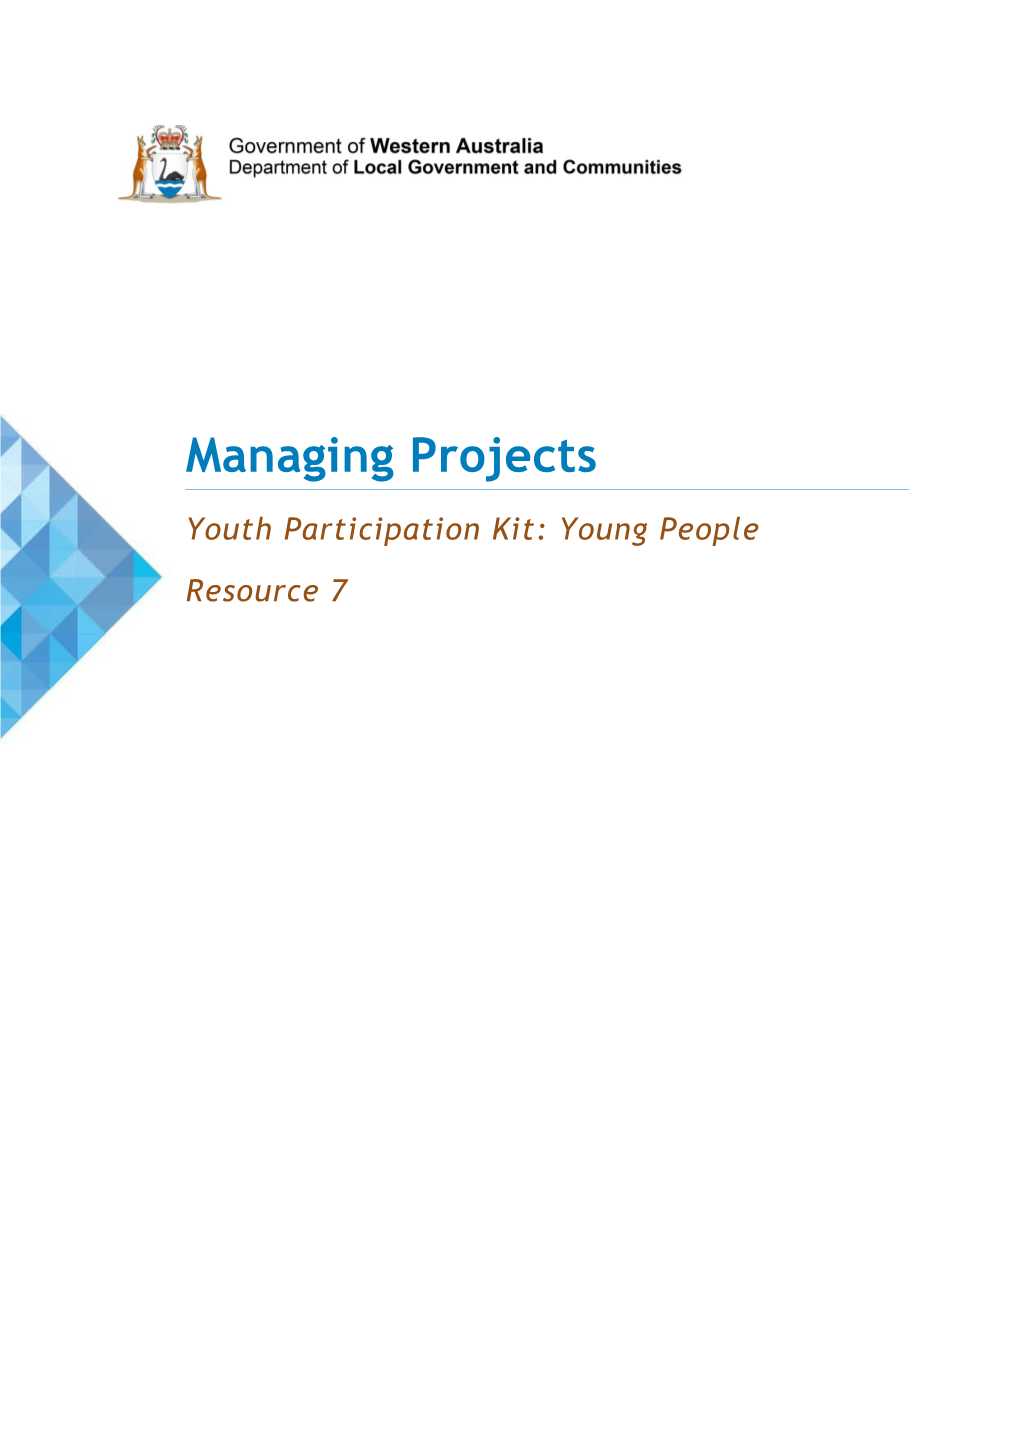 Youth Participation Kit: Young People - Resource 7 - Managing Projects